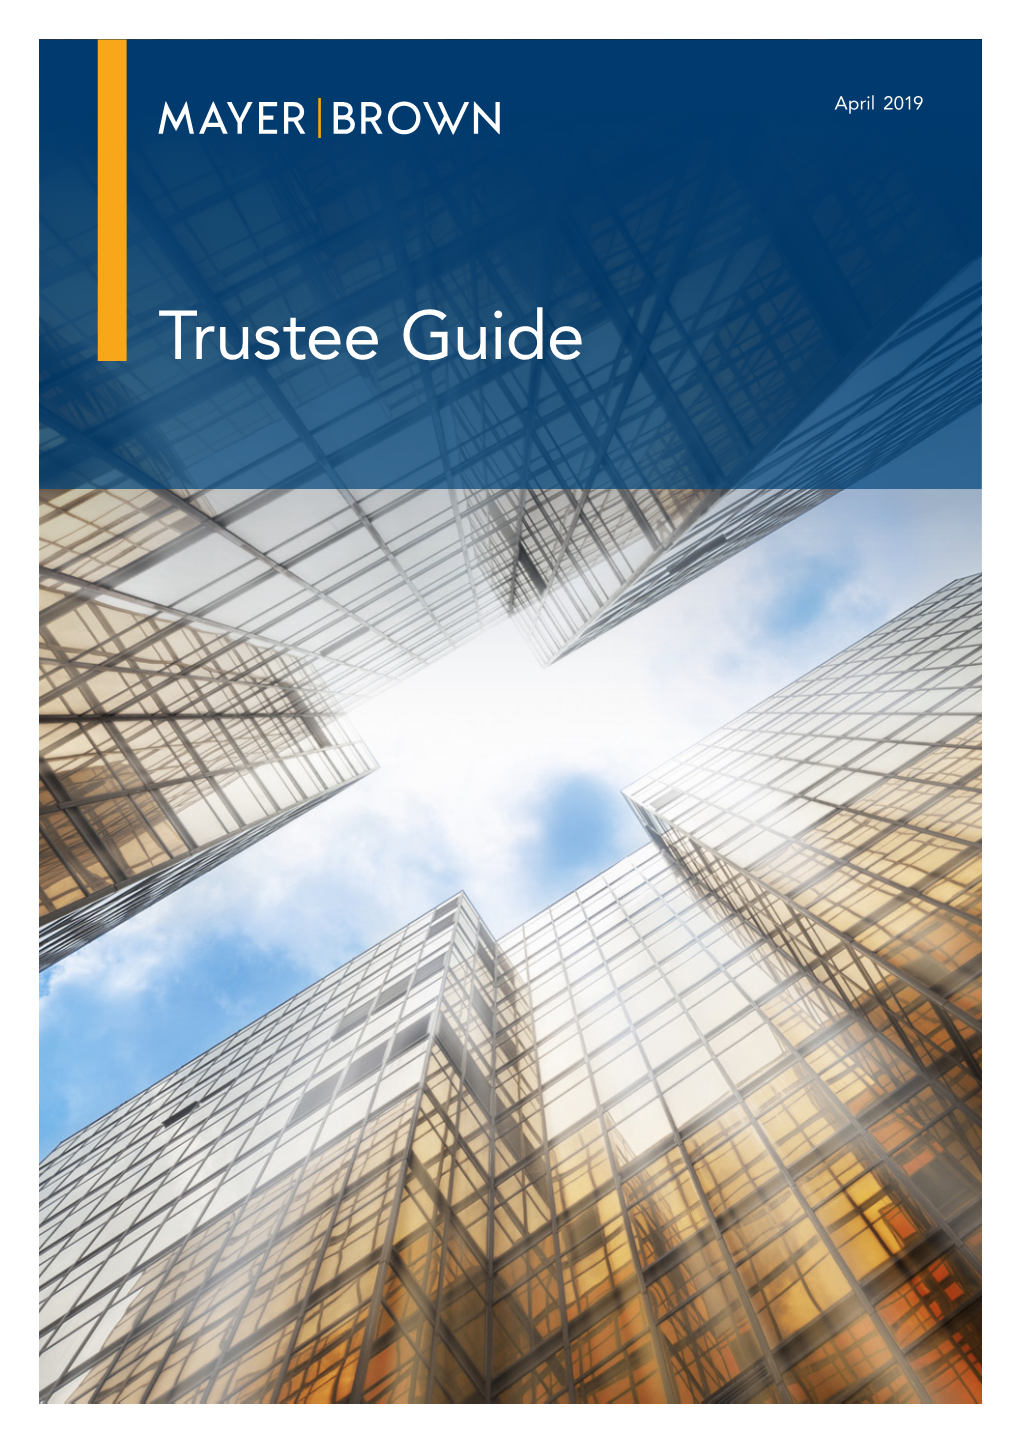 Trustee Guide Introduction